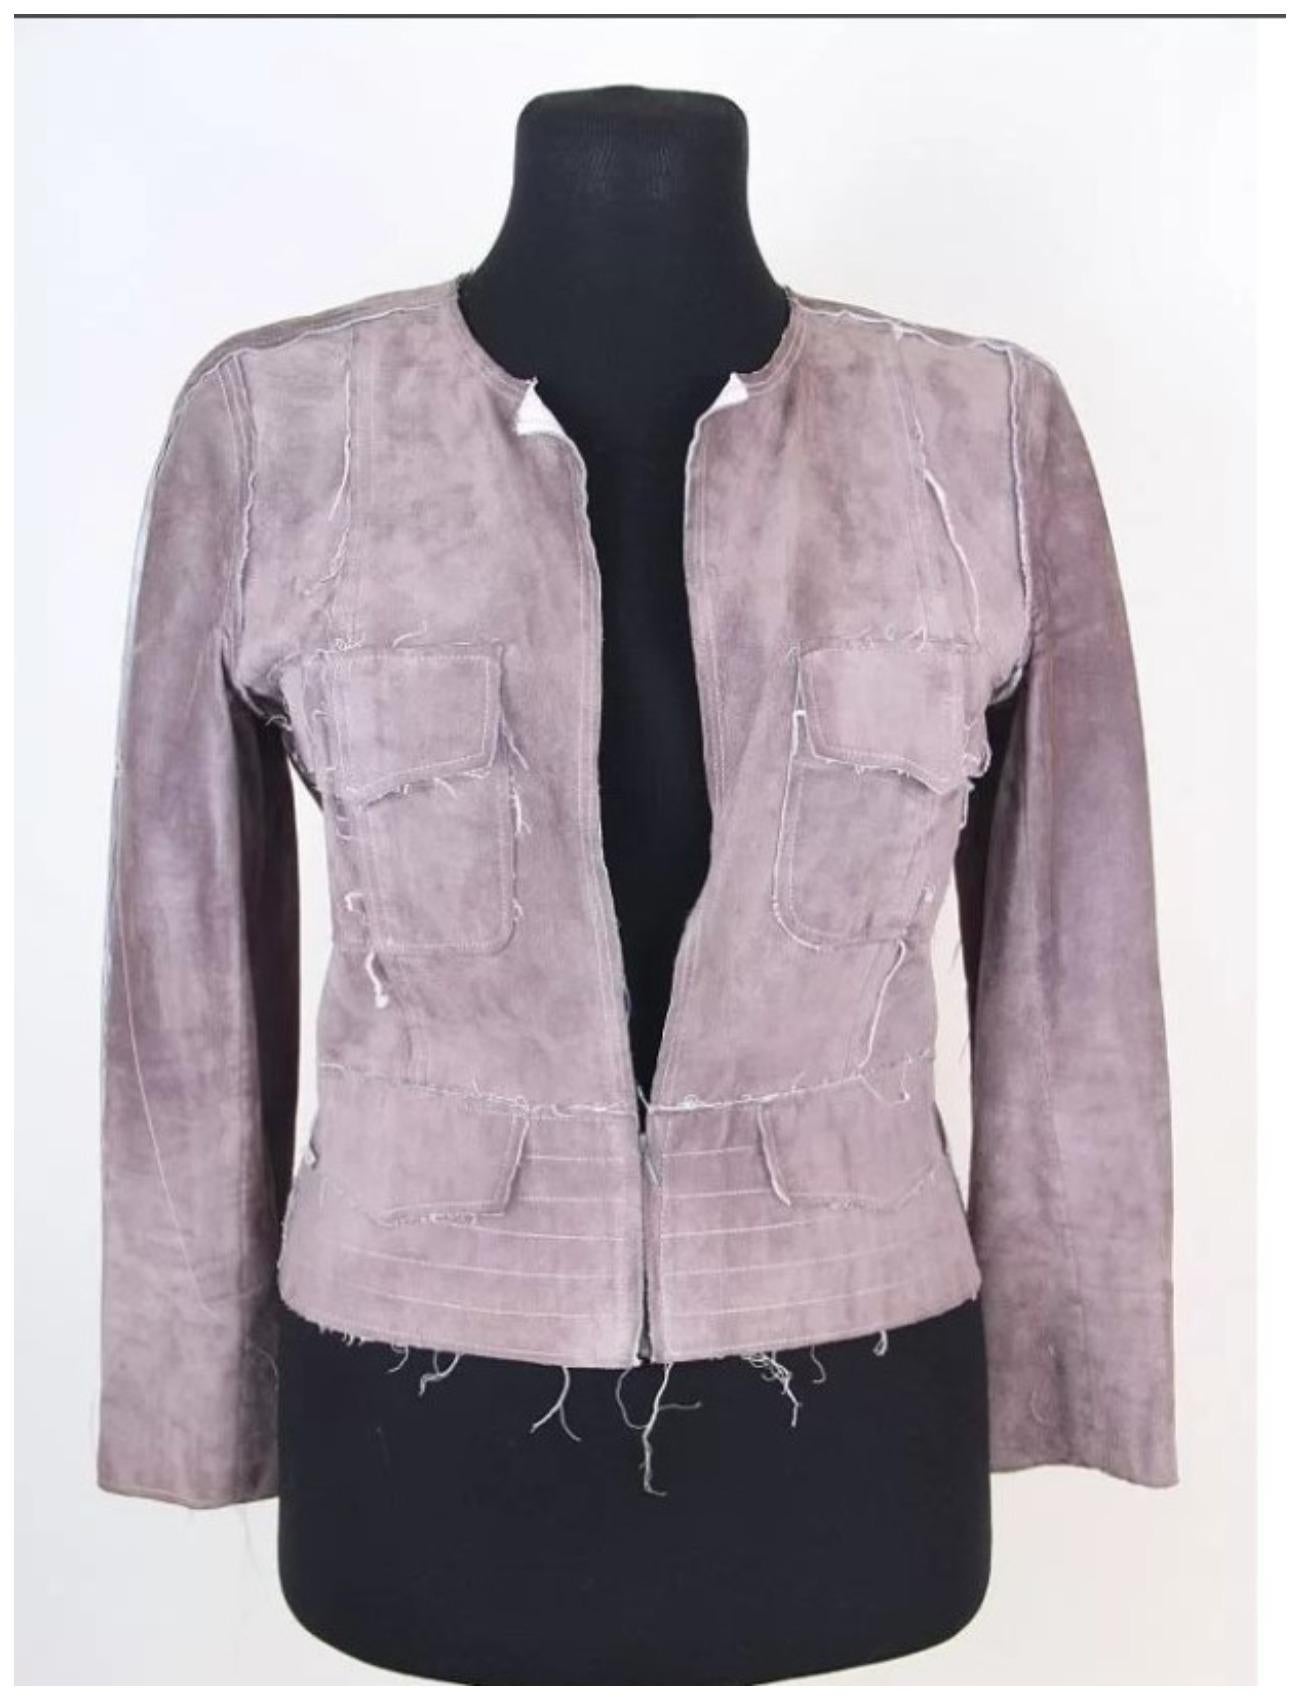 CHANEL & Karl Lagerfeld 03P 2003 Spring Runway jacket y2k In Excellent Condition For Sale In Алматинский Почтамт, KZ